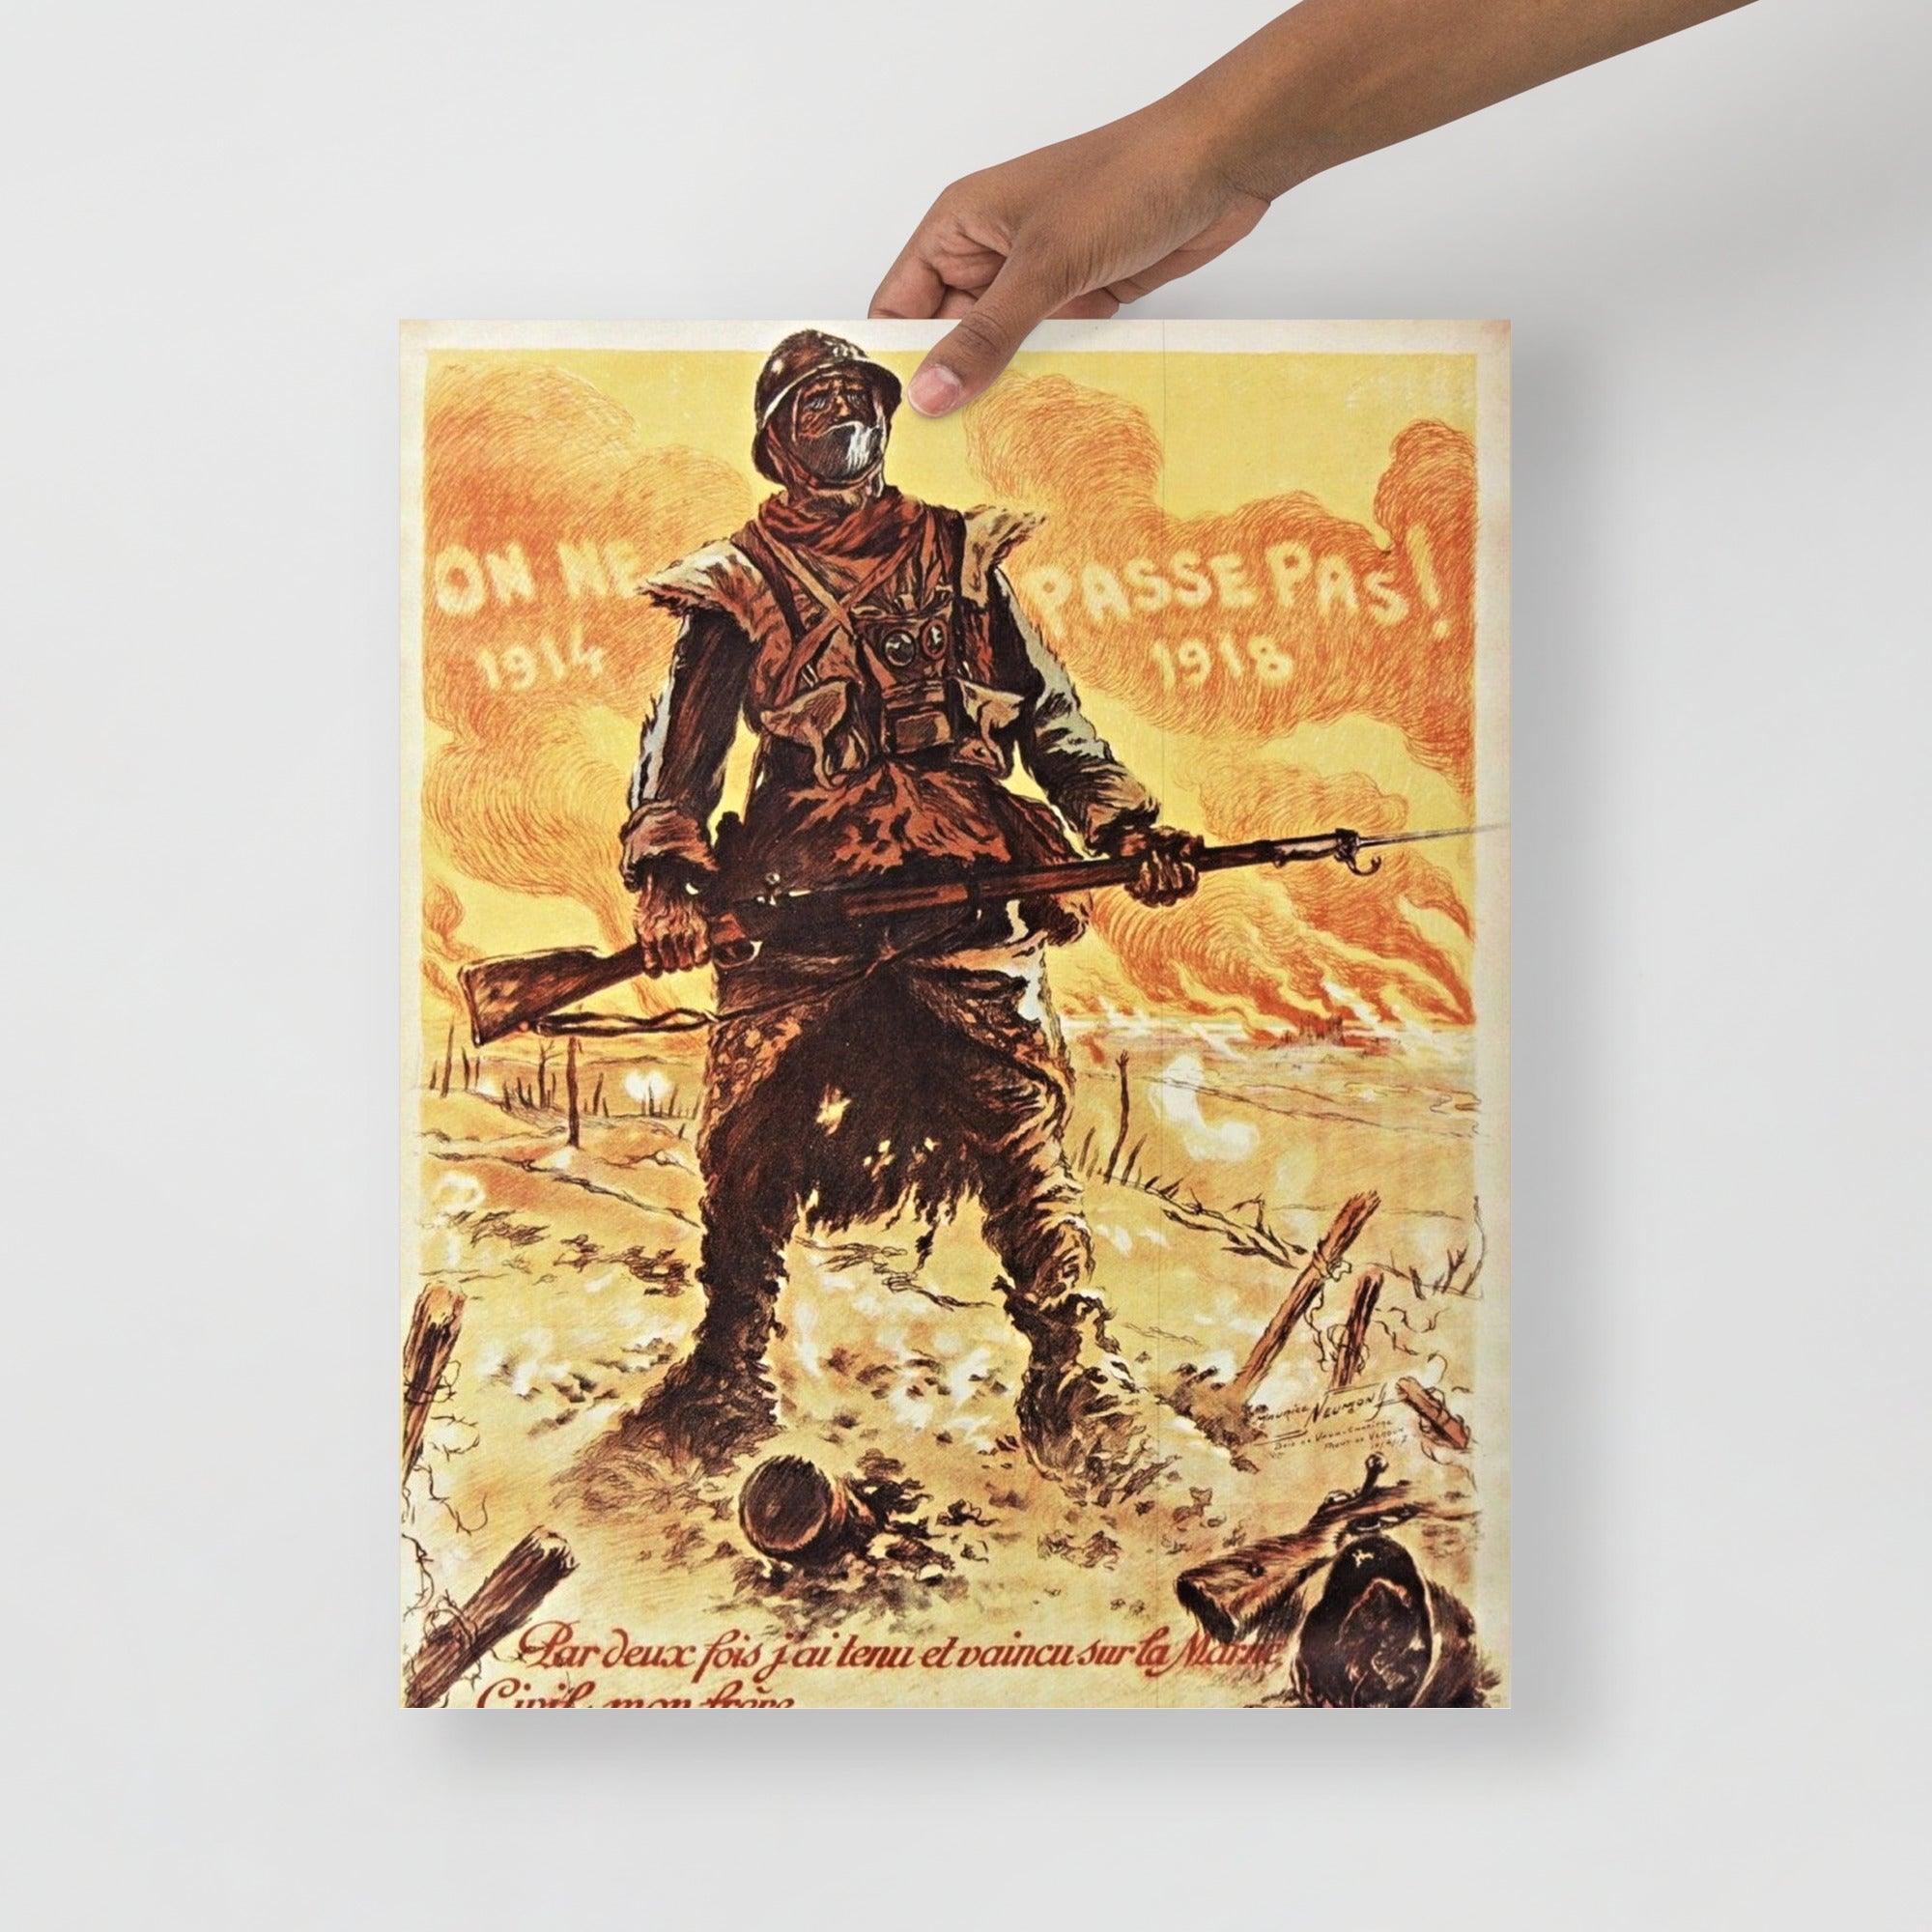 A They Shall Not Pass (On Ne Passe Pas) By Maurice Neumont poster on a plain backdrop in size 16x20”.